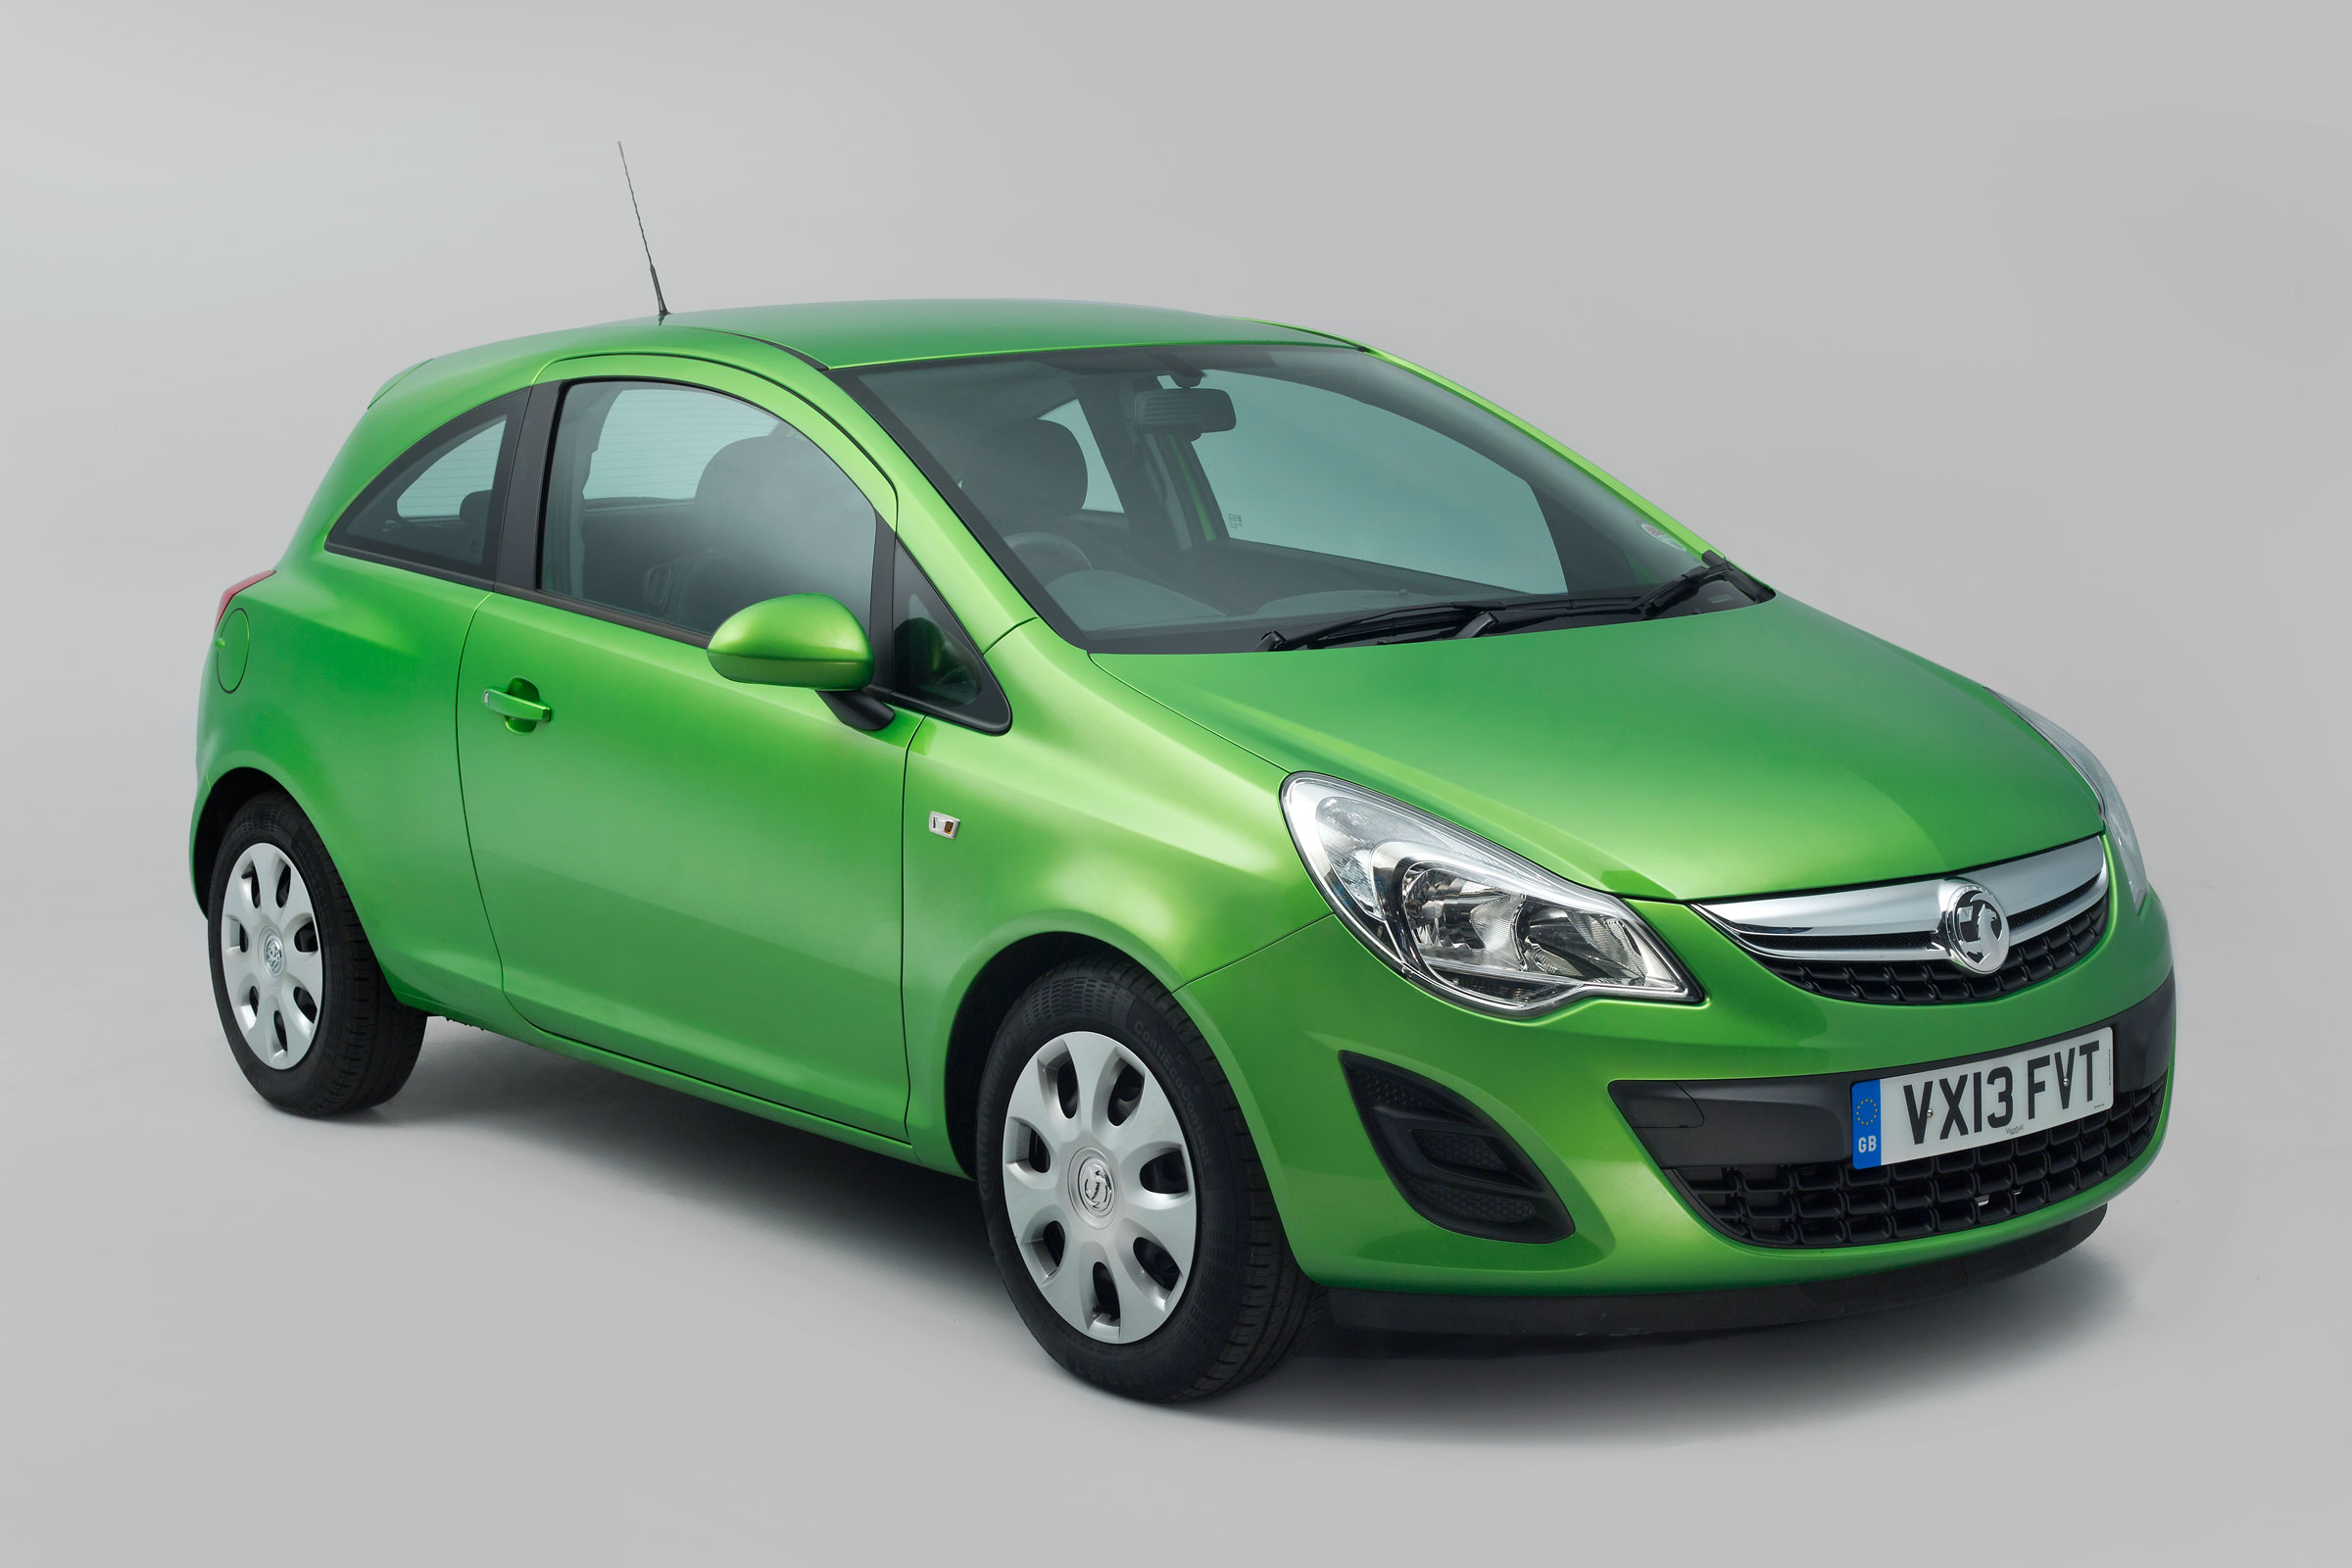 Used Vauxhall Corsa D buying guide: 2006-2014 (Mk4)